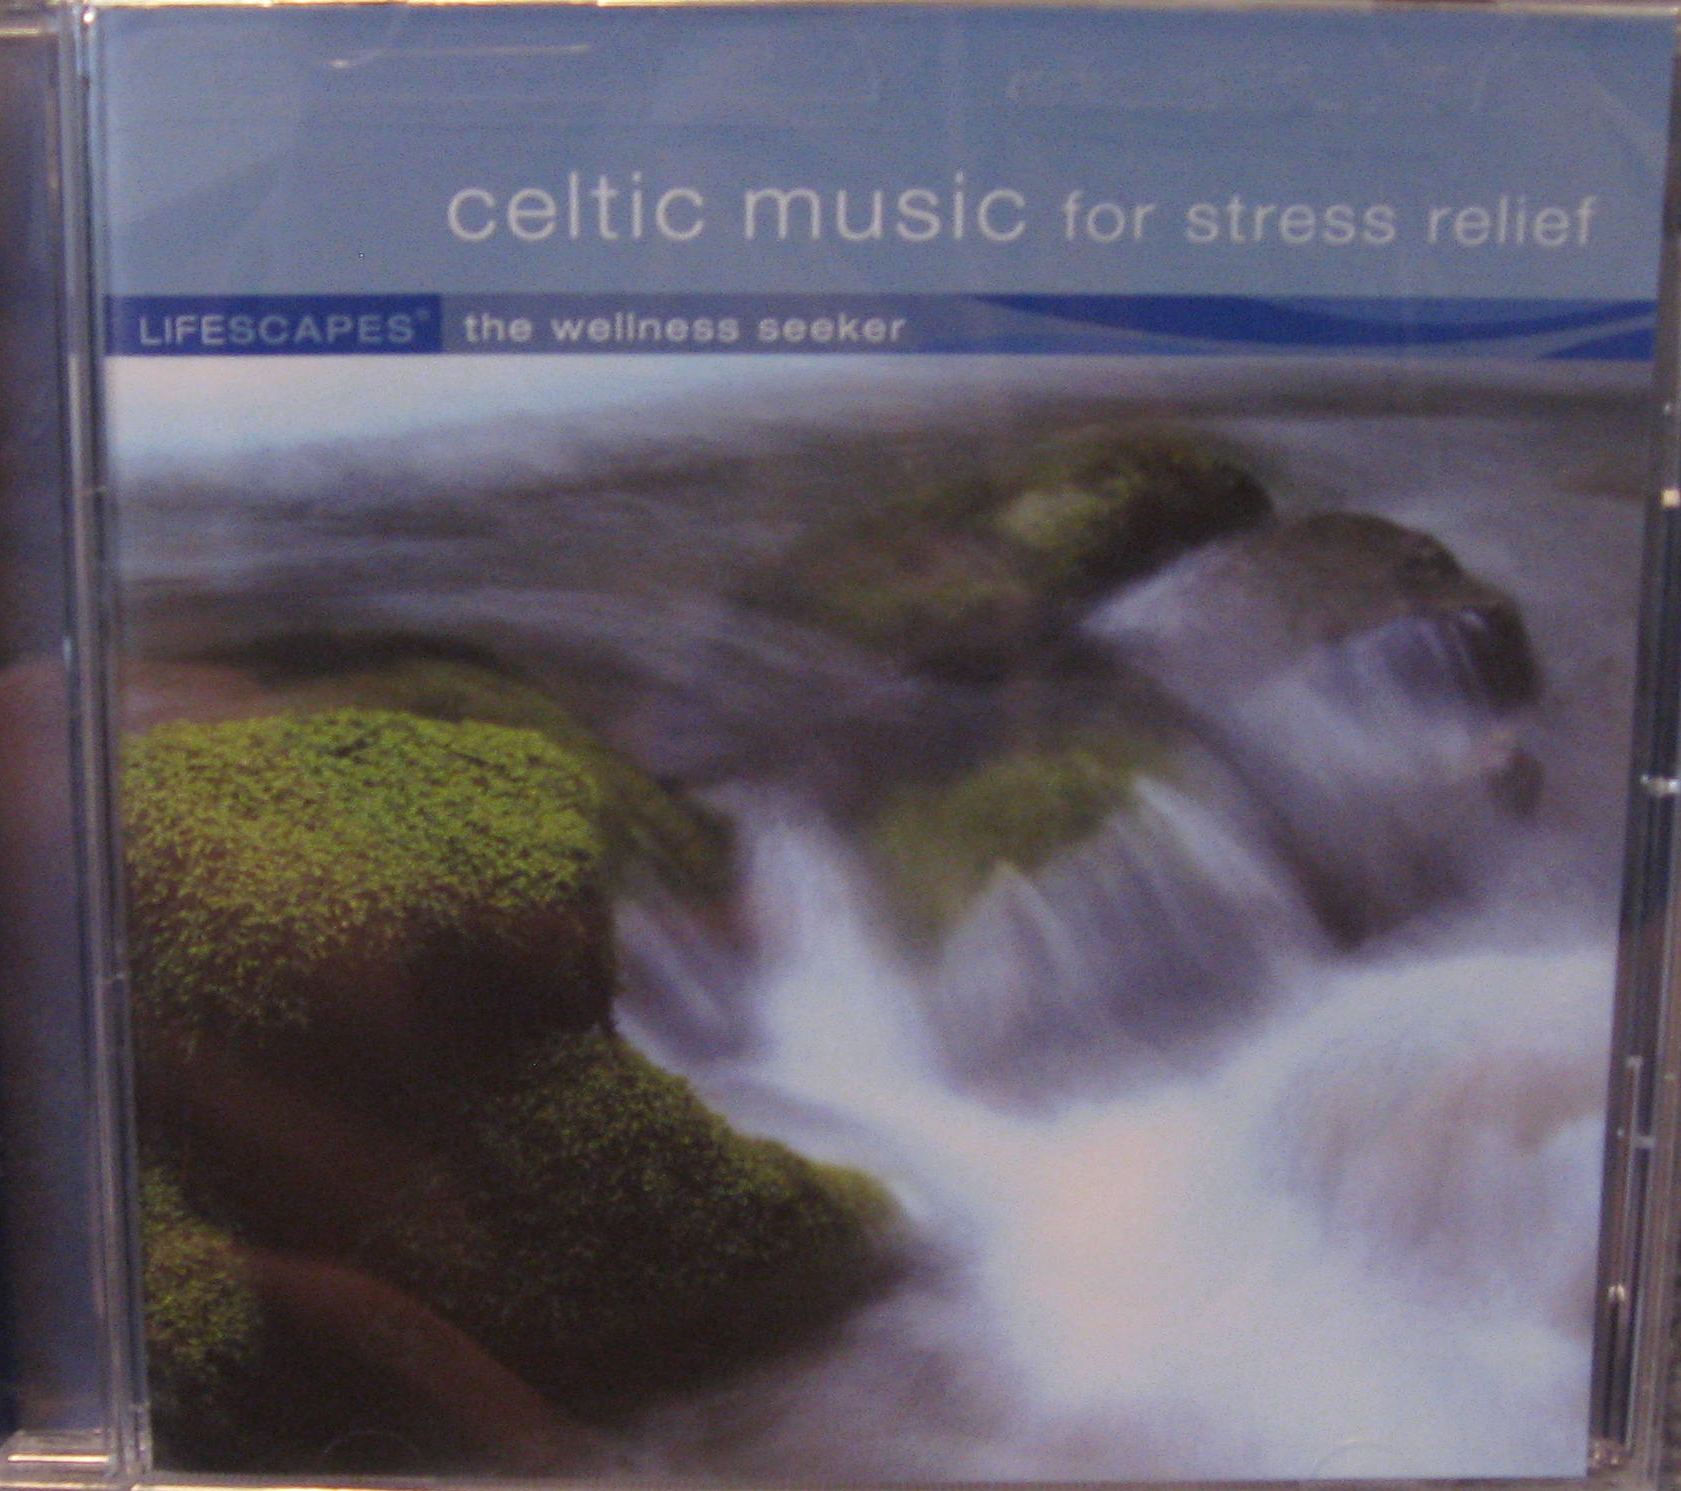 Life Scapes- celtic music for stress relief